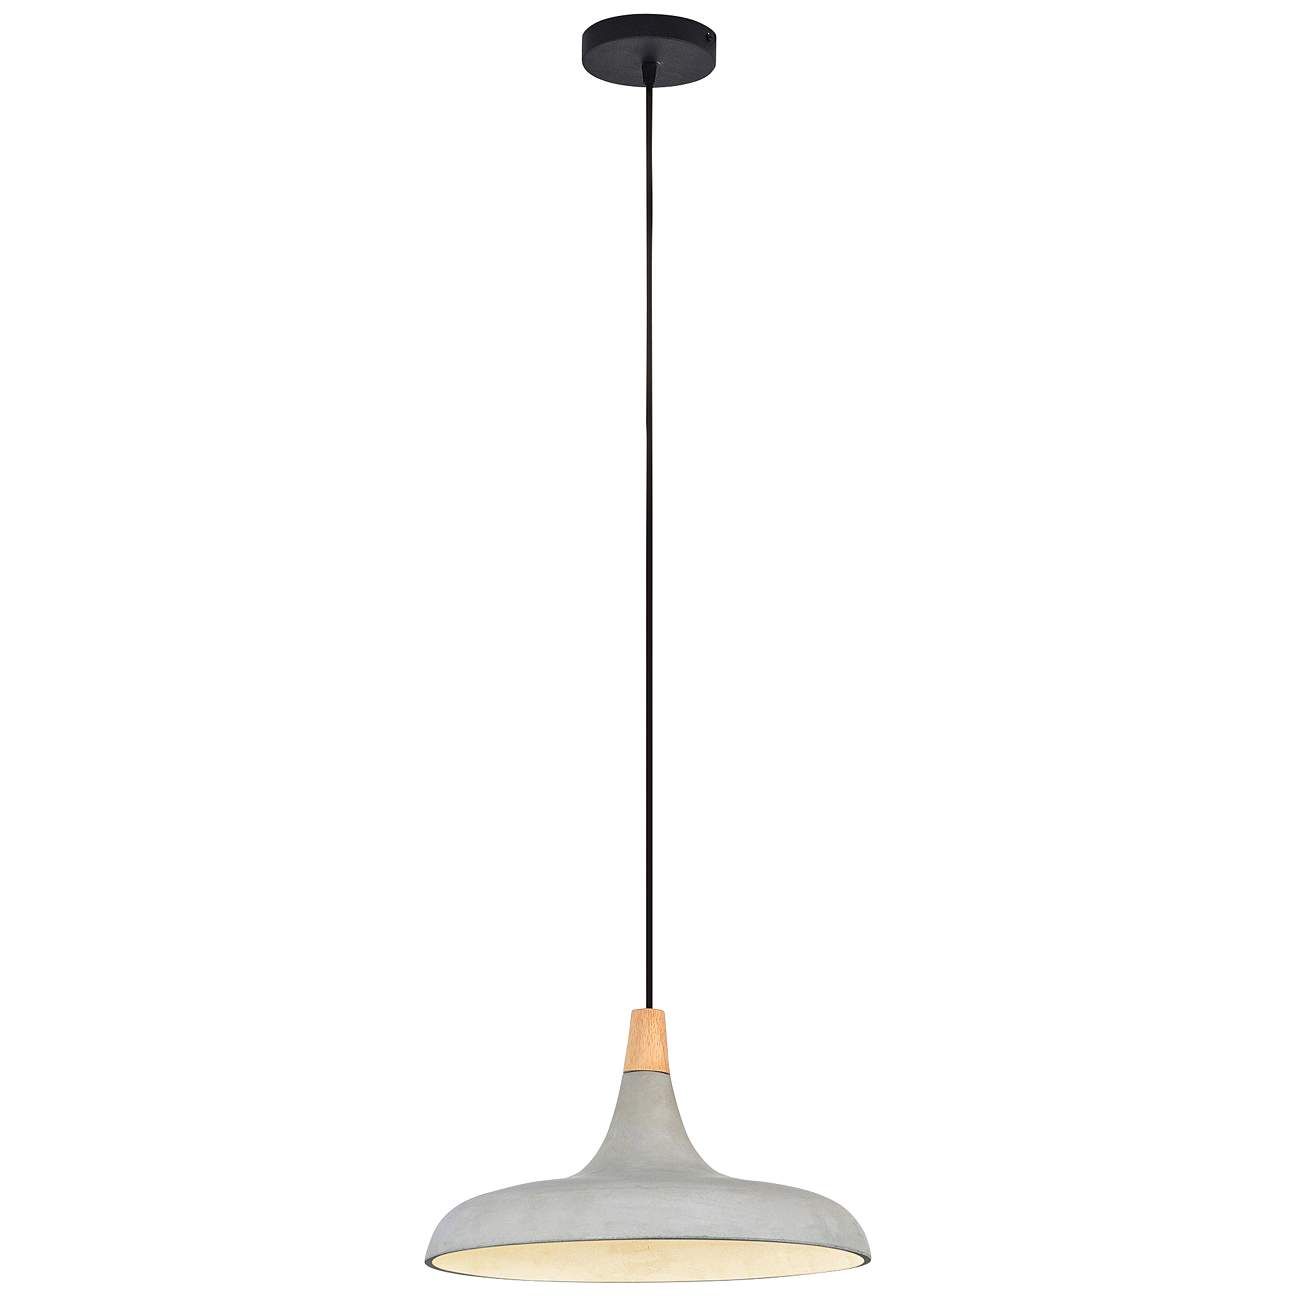 Viola-May 16"W Natural Gray and Textured Black Pendant Light | Lamps Plus